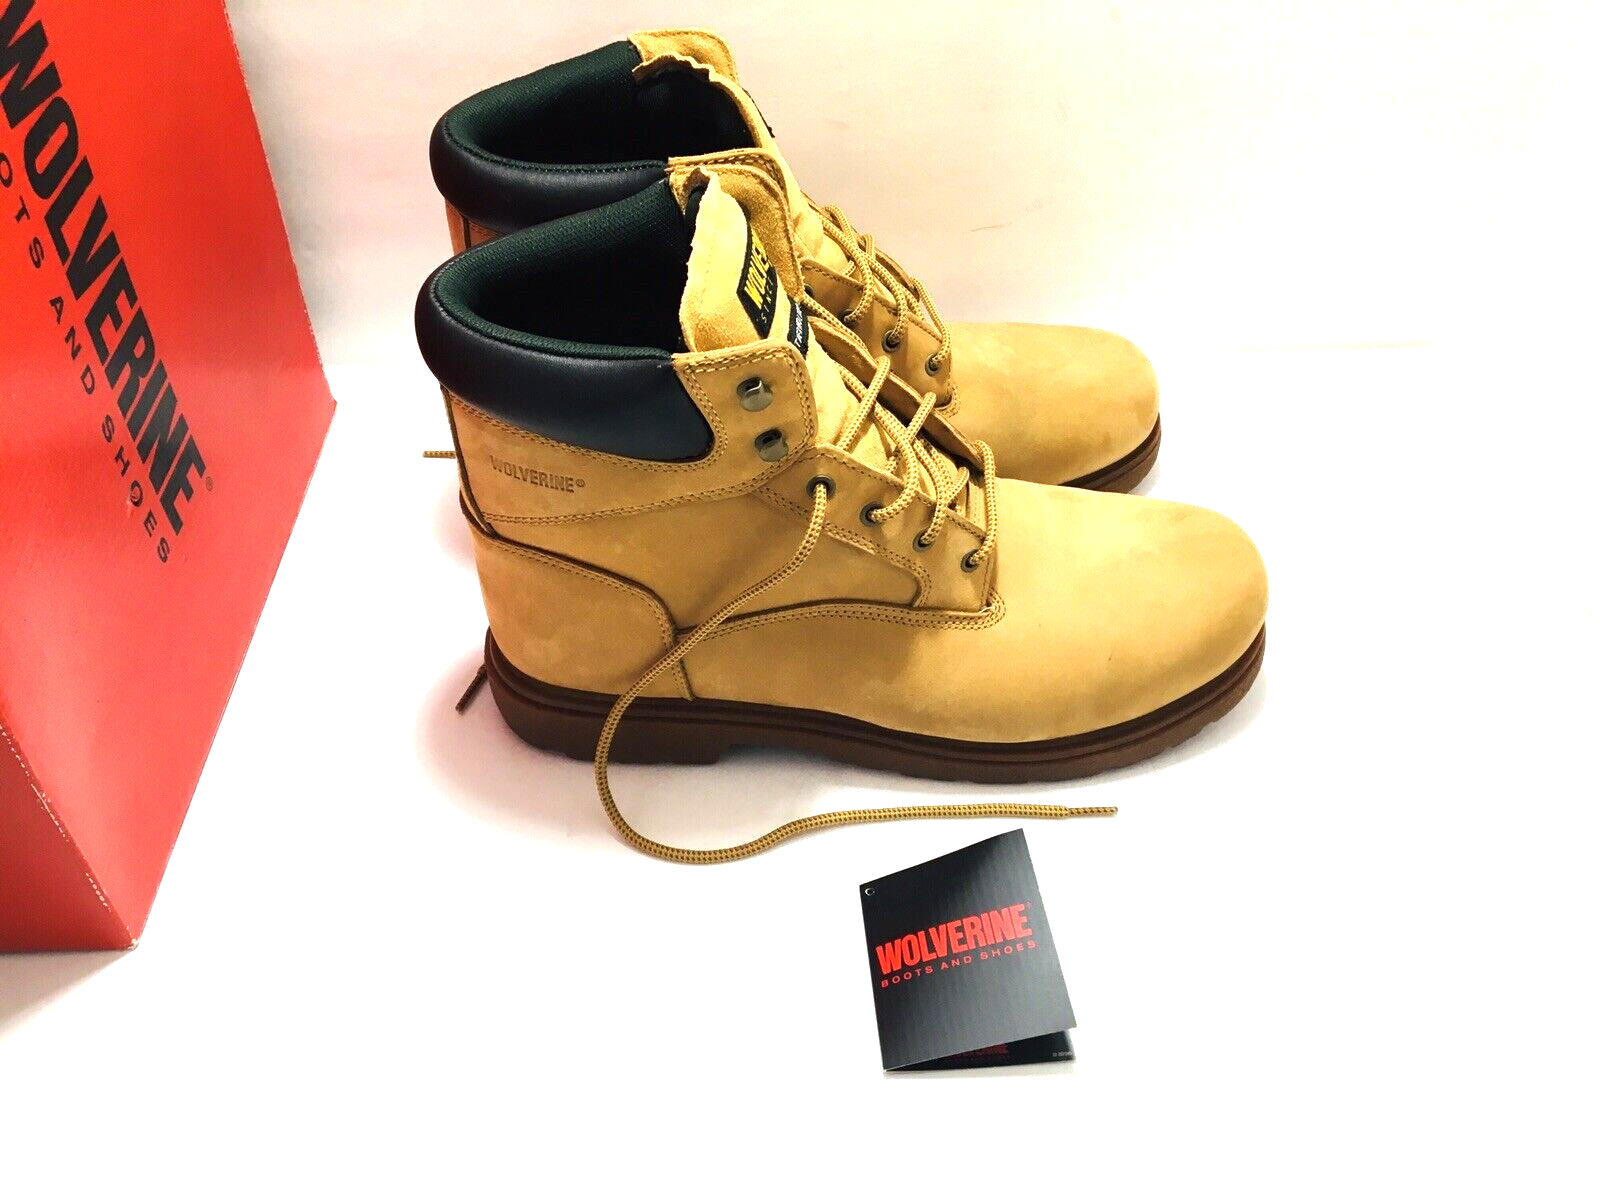 Primary image for Wolverine Cheyenne 6” Gold Tan Work Boots - Size 14 M W/Original Box Heavy Duty